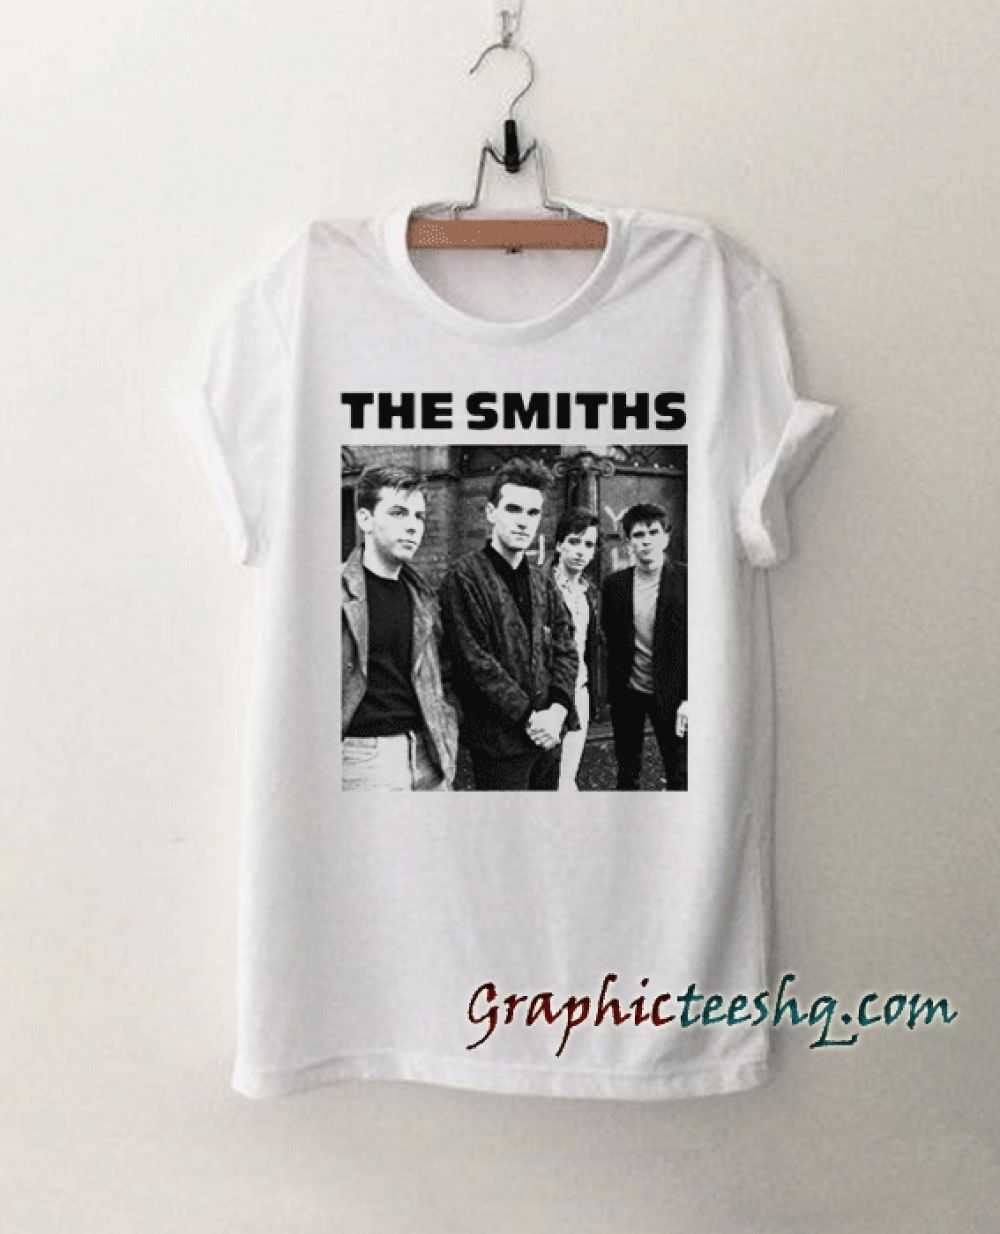 The smiths black tee shirt for adult men and women. It feels soft